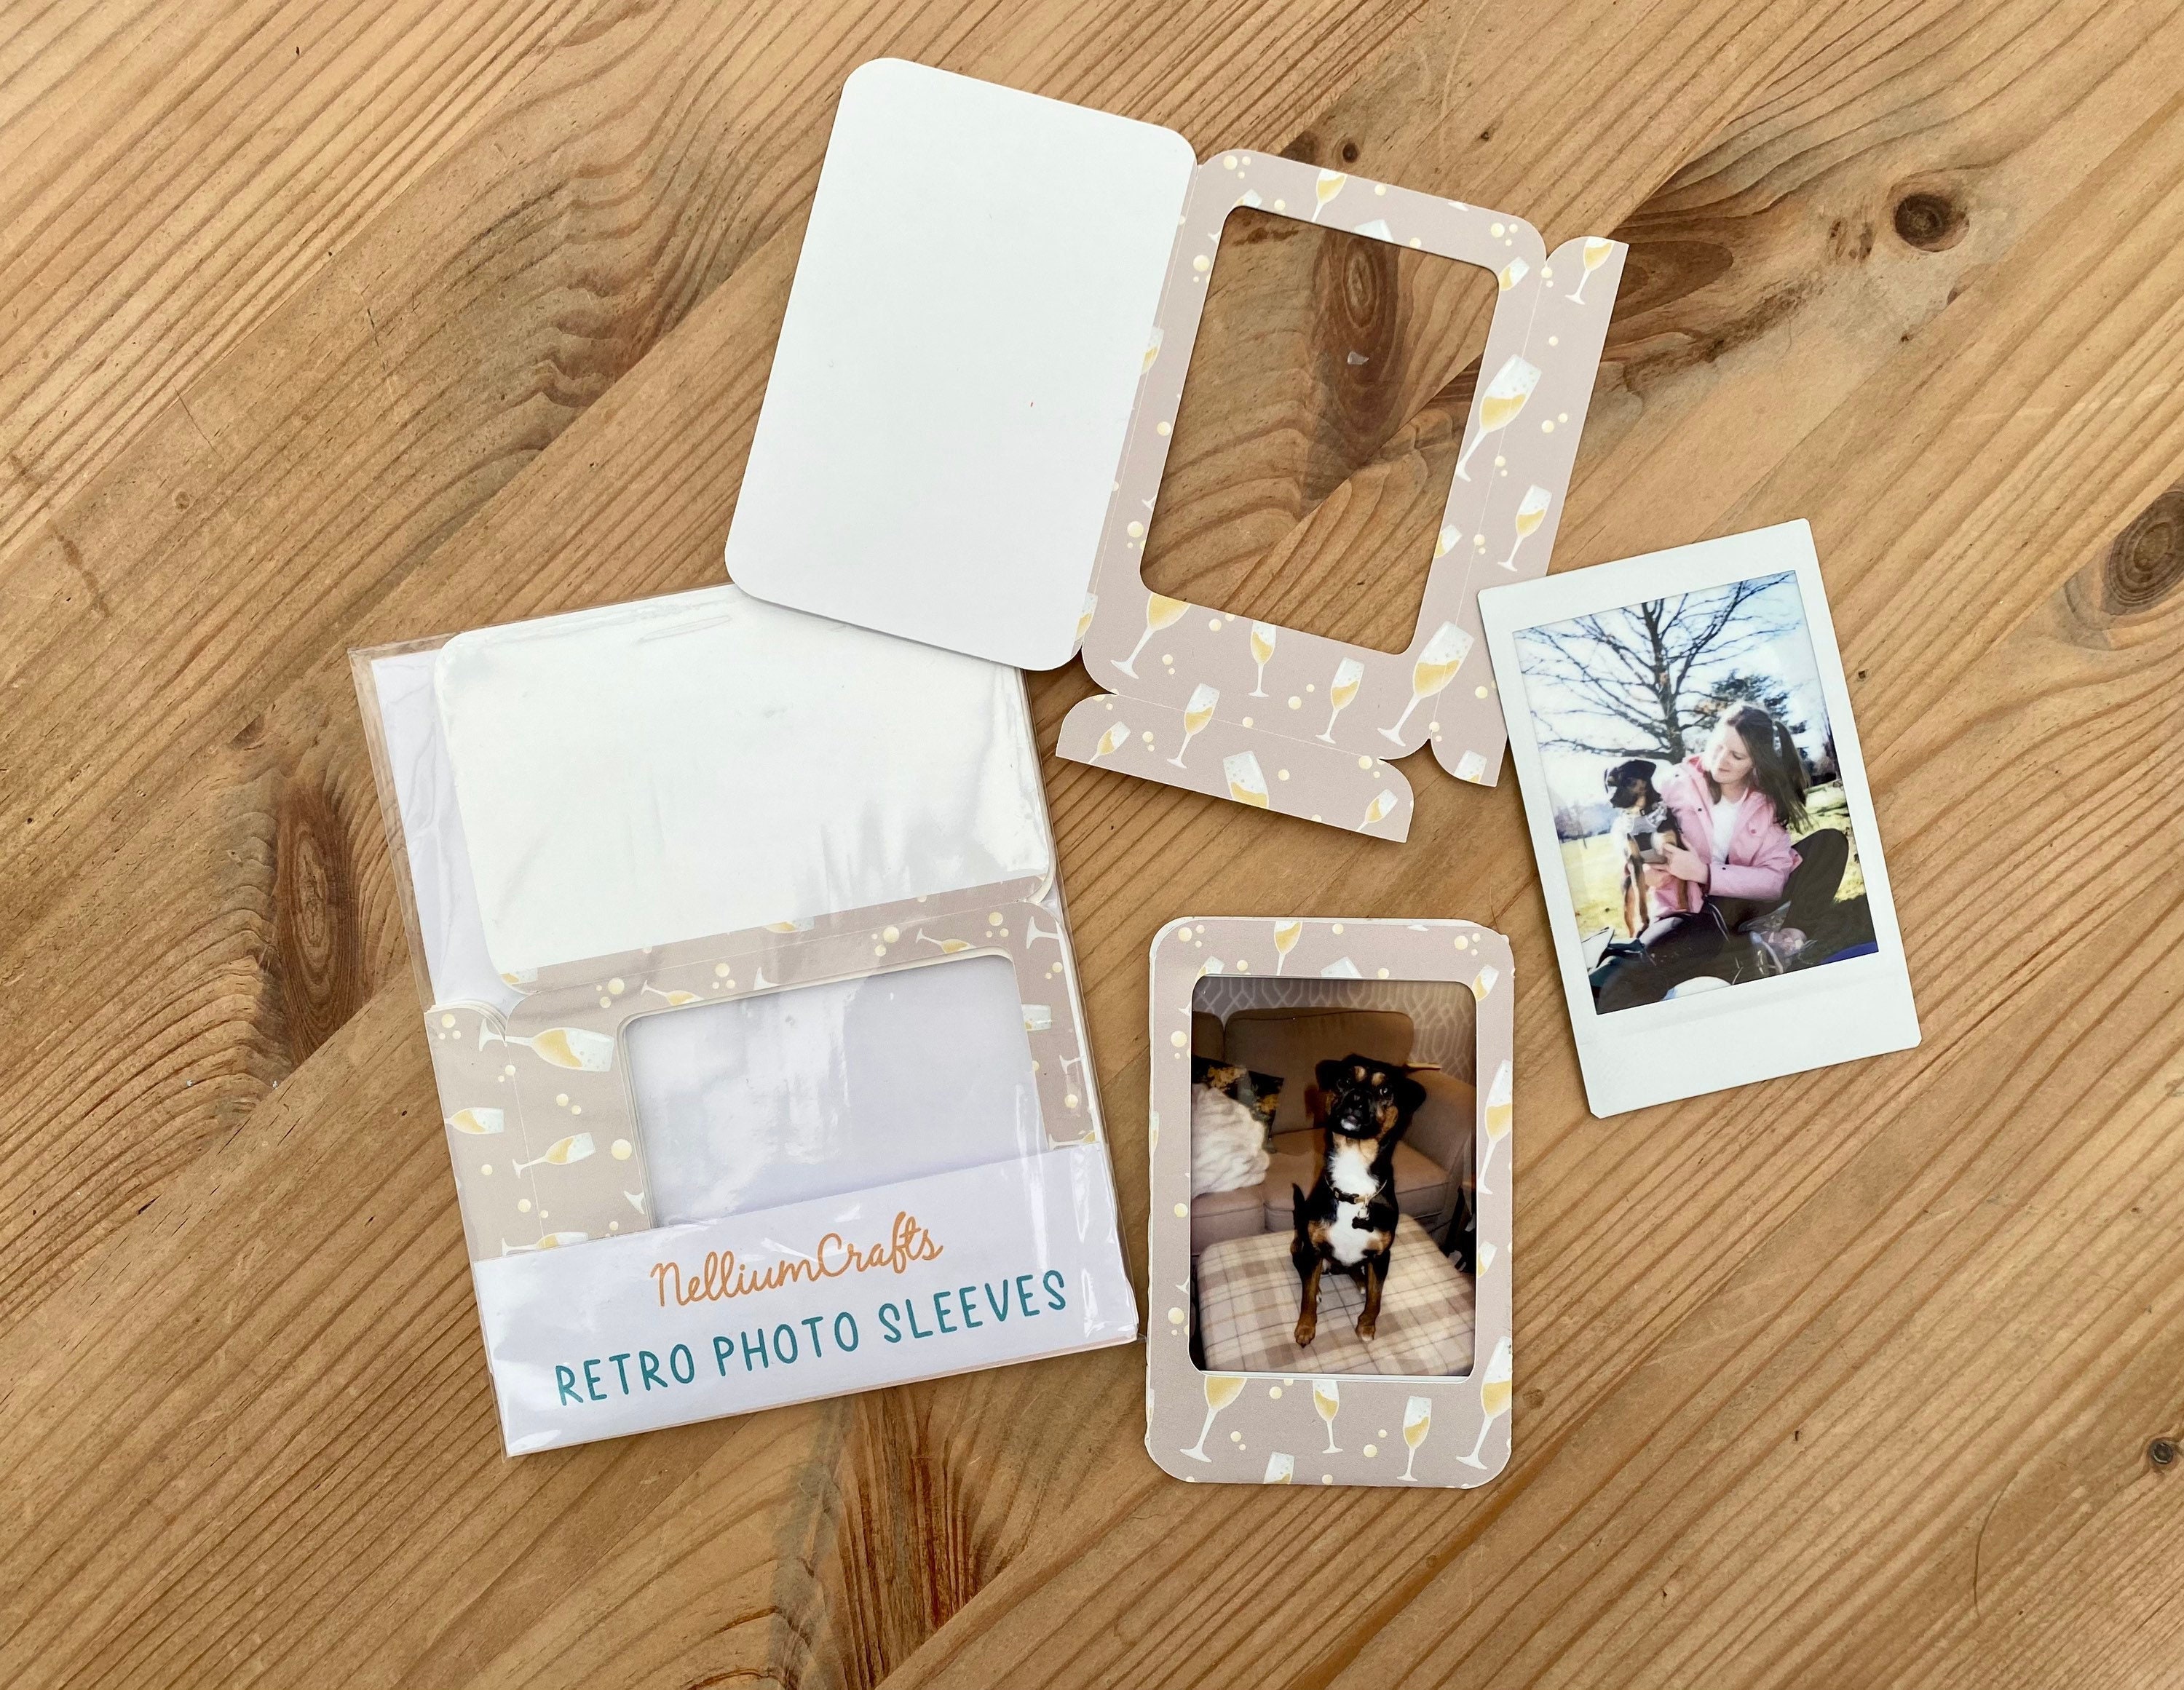 4 X 6 Photo Sleeves Package of Ten for 60 Photos these Sleeves